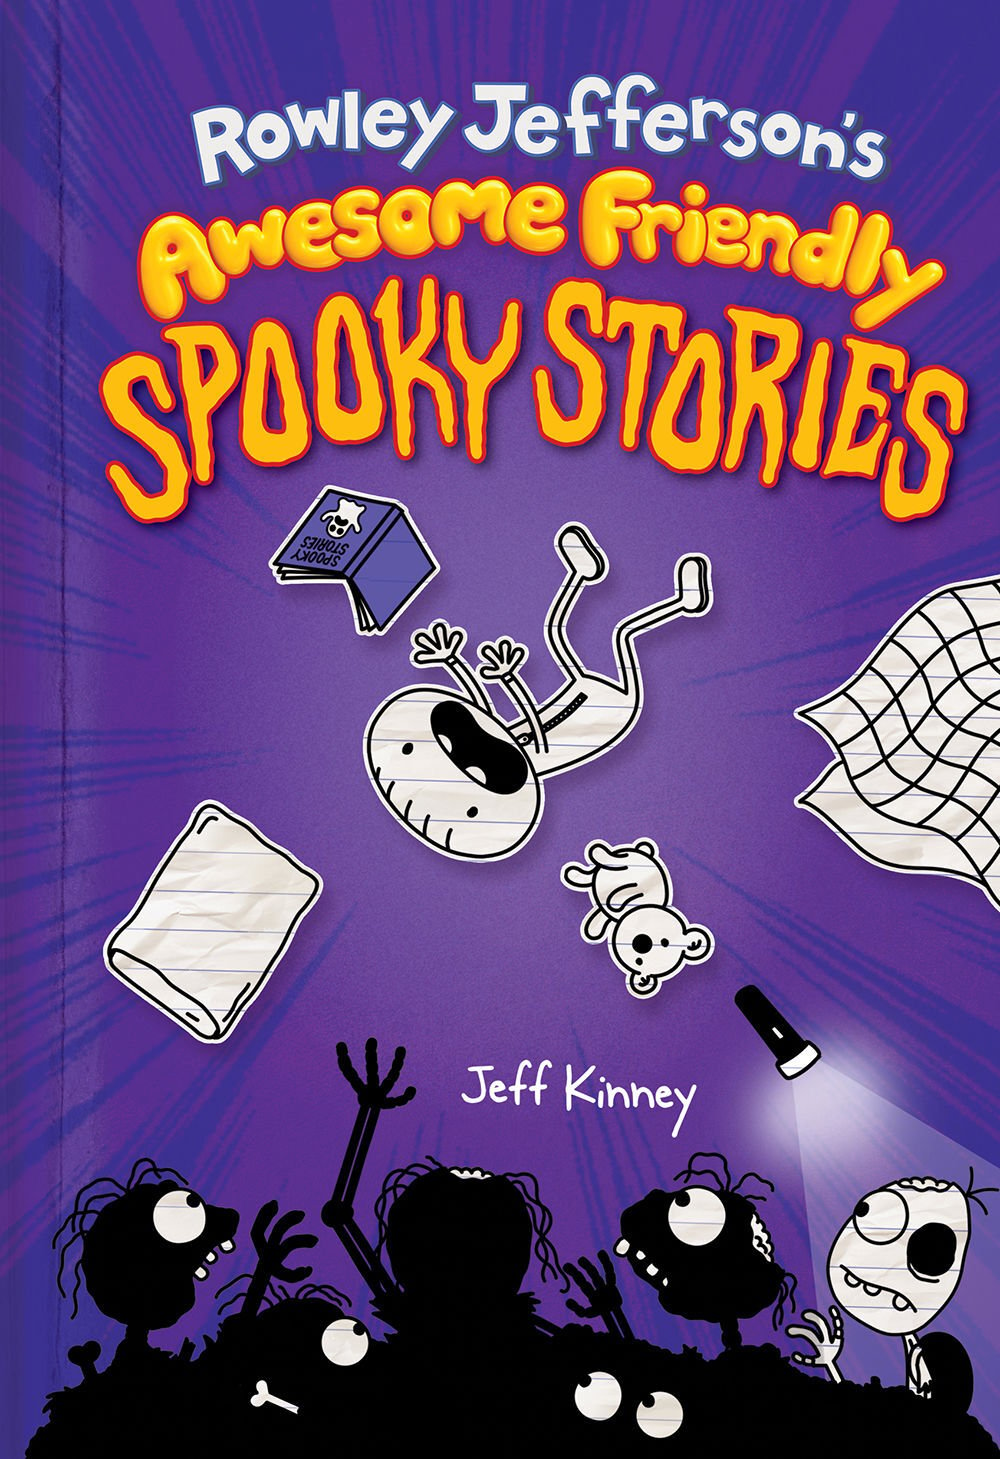 Diary of a Wimpy Kid Release Party - South Brunswick Public Library